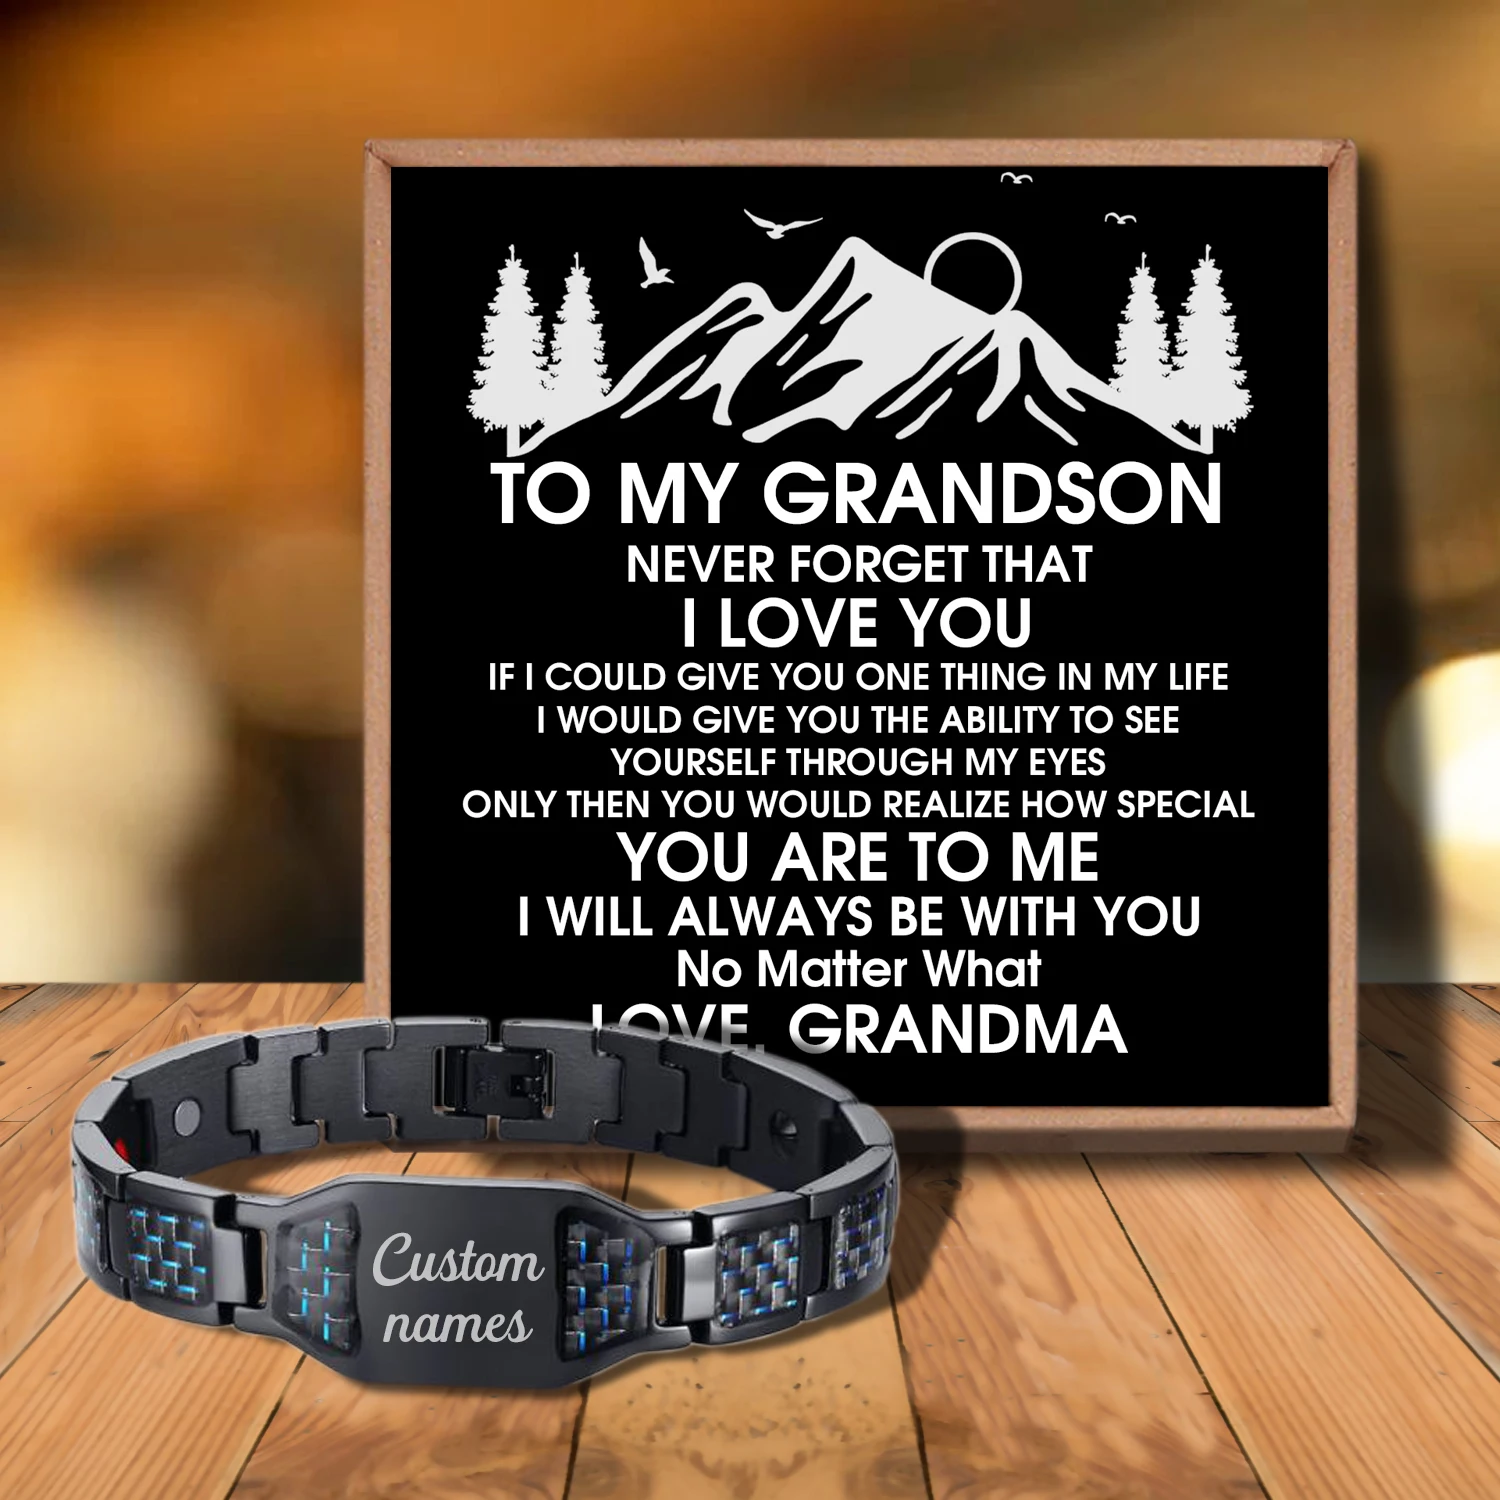 

Sac3114 To My Grandson Never Feel That You Are Love from Love Grandma Customizable Message Card Bracelet for Birthday Anniversar